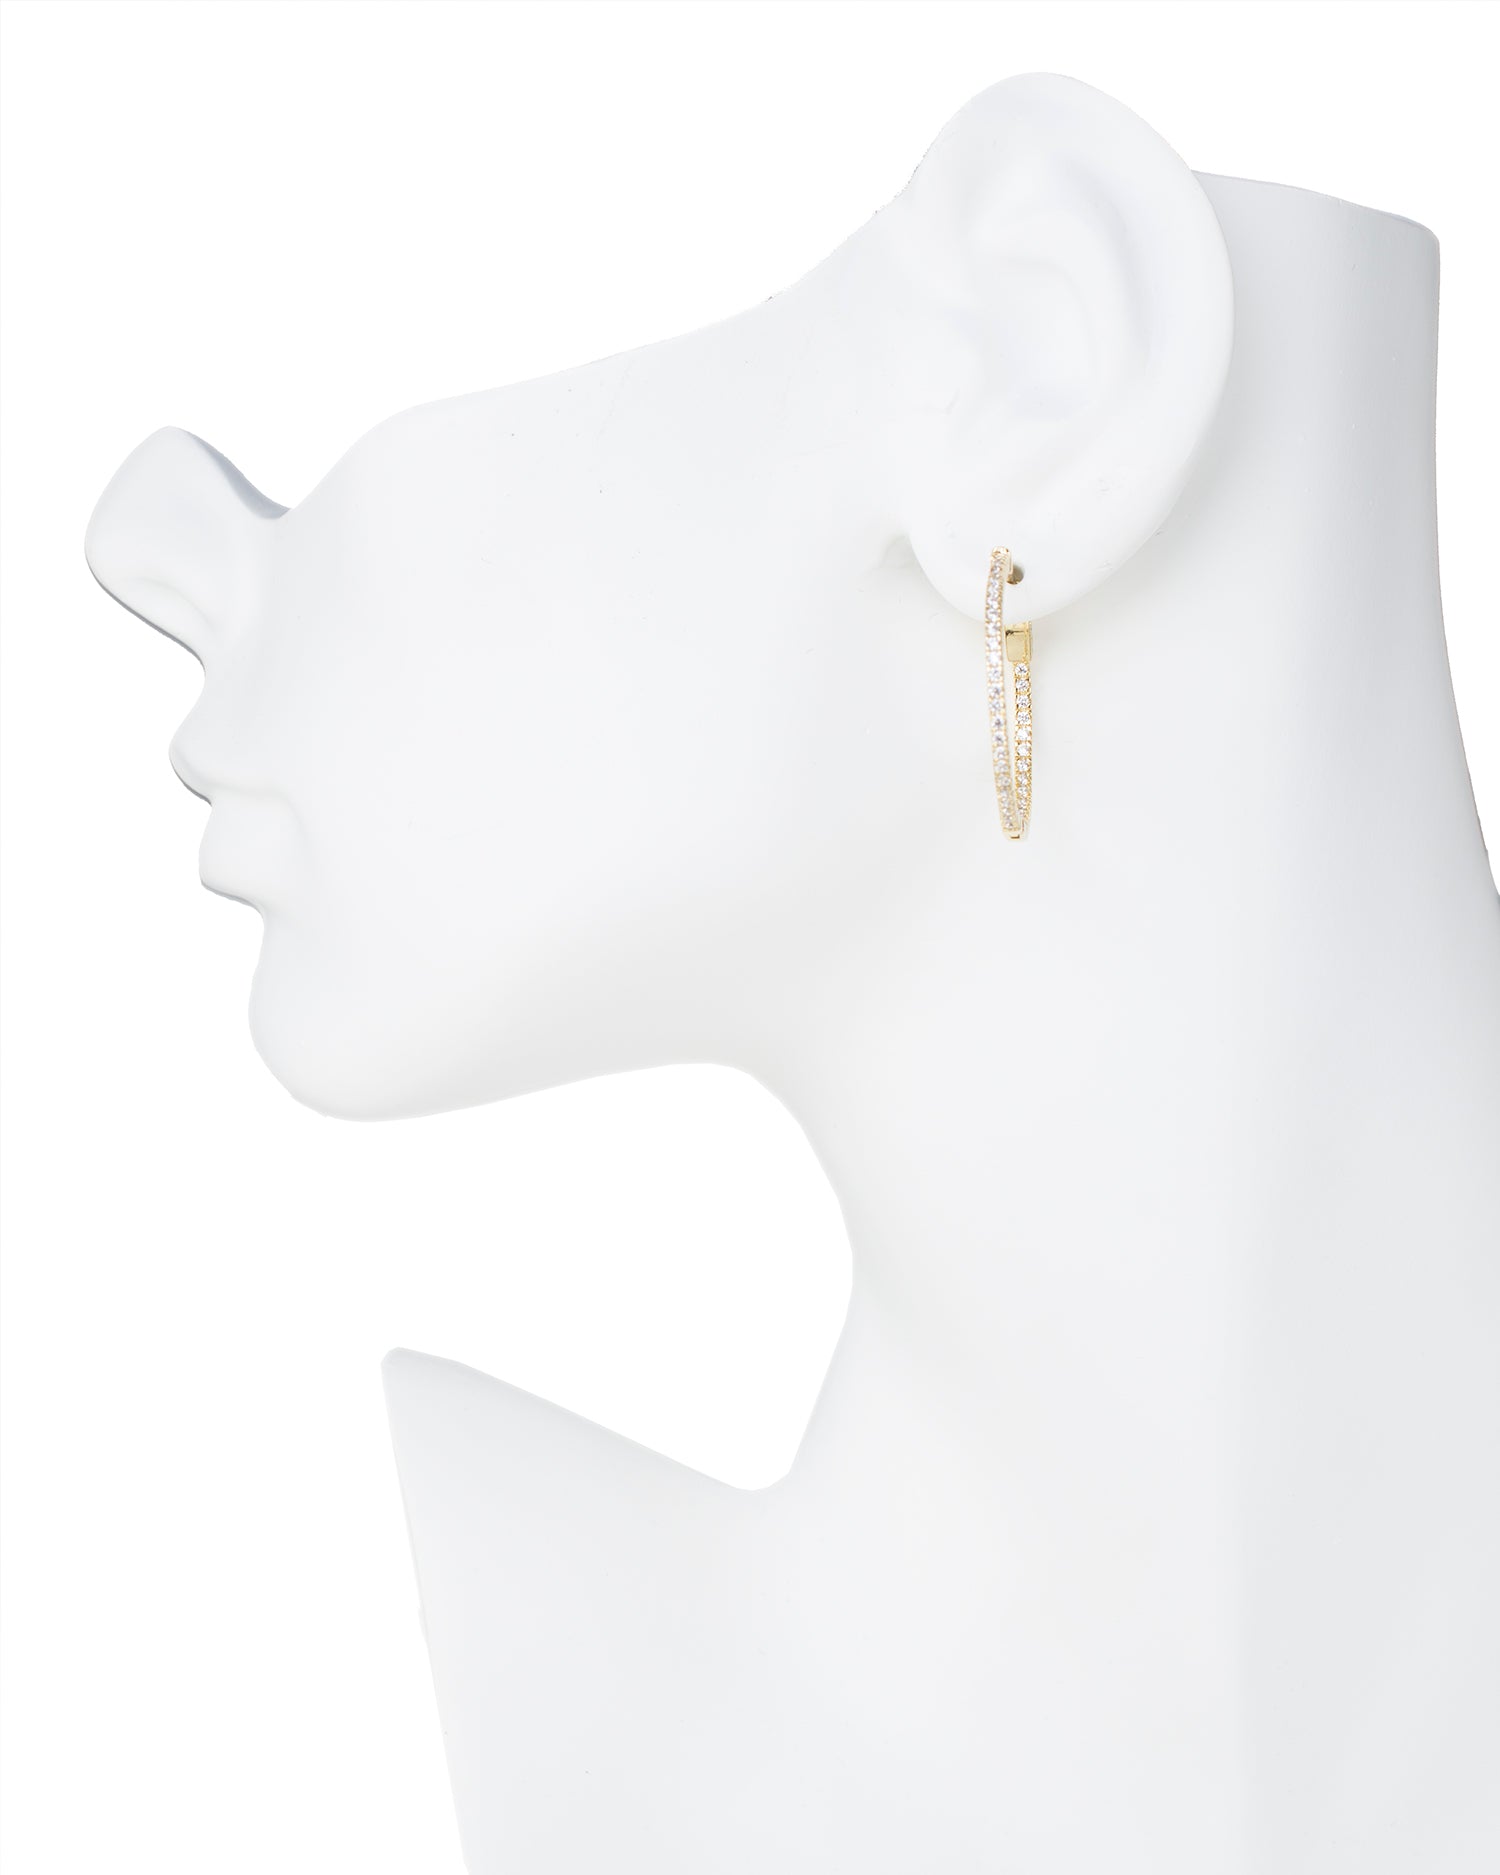 Inside Out Yellow Gold Plated Hoop Earring